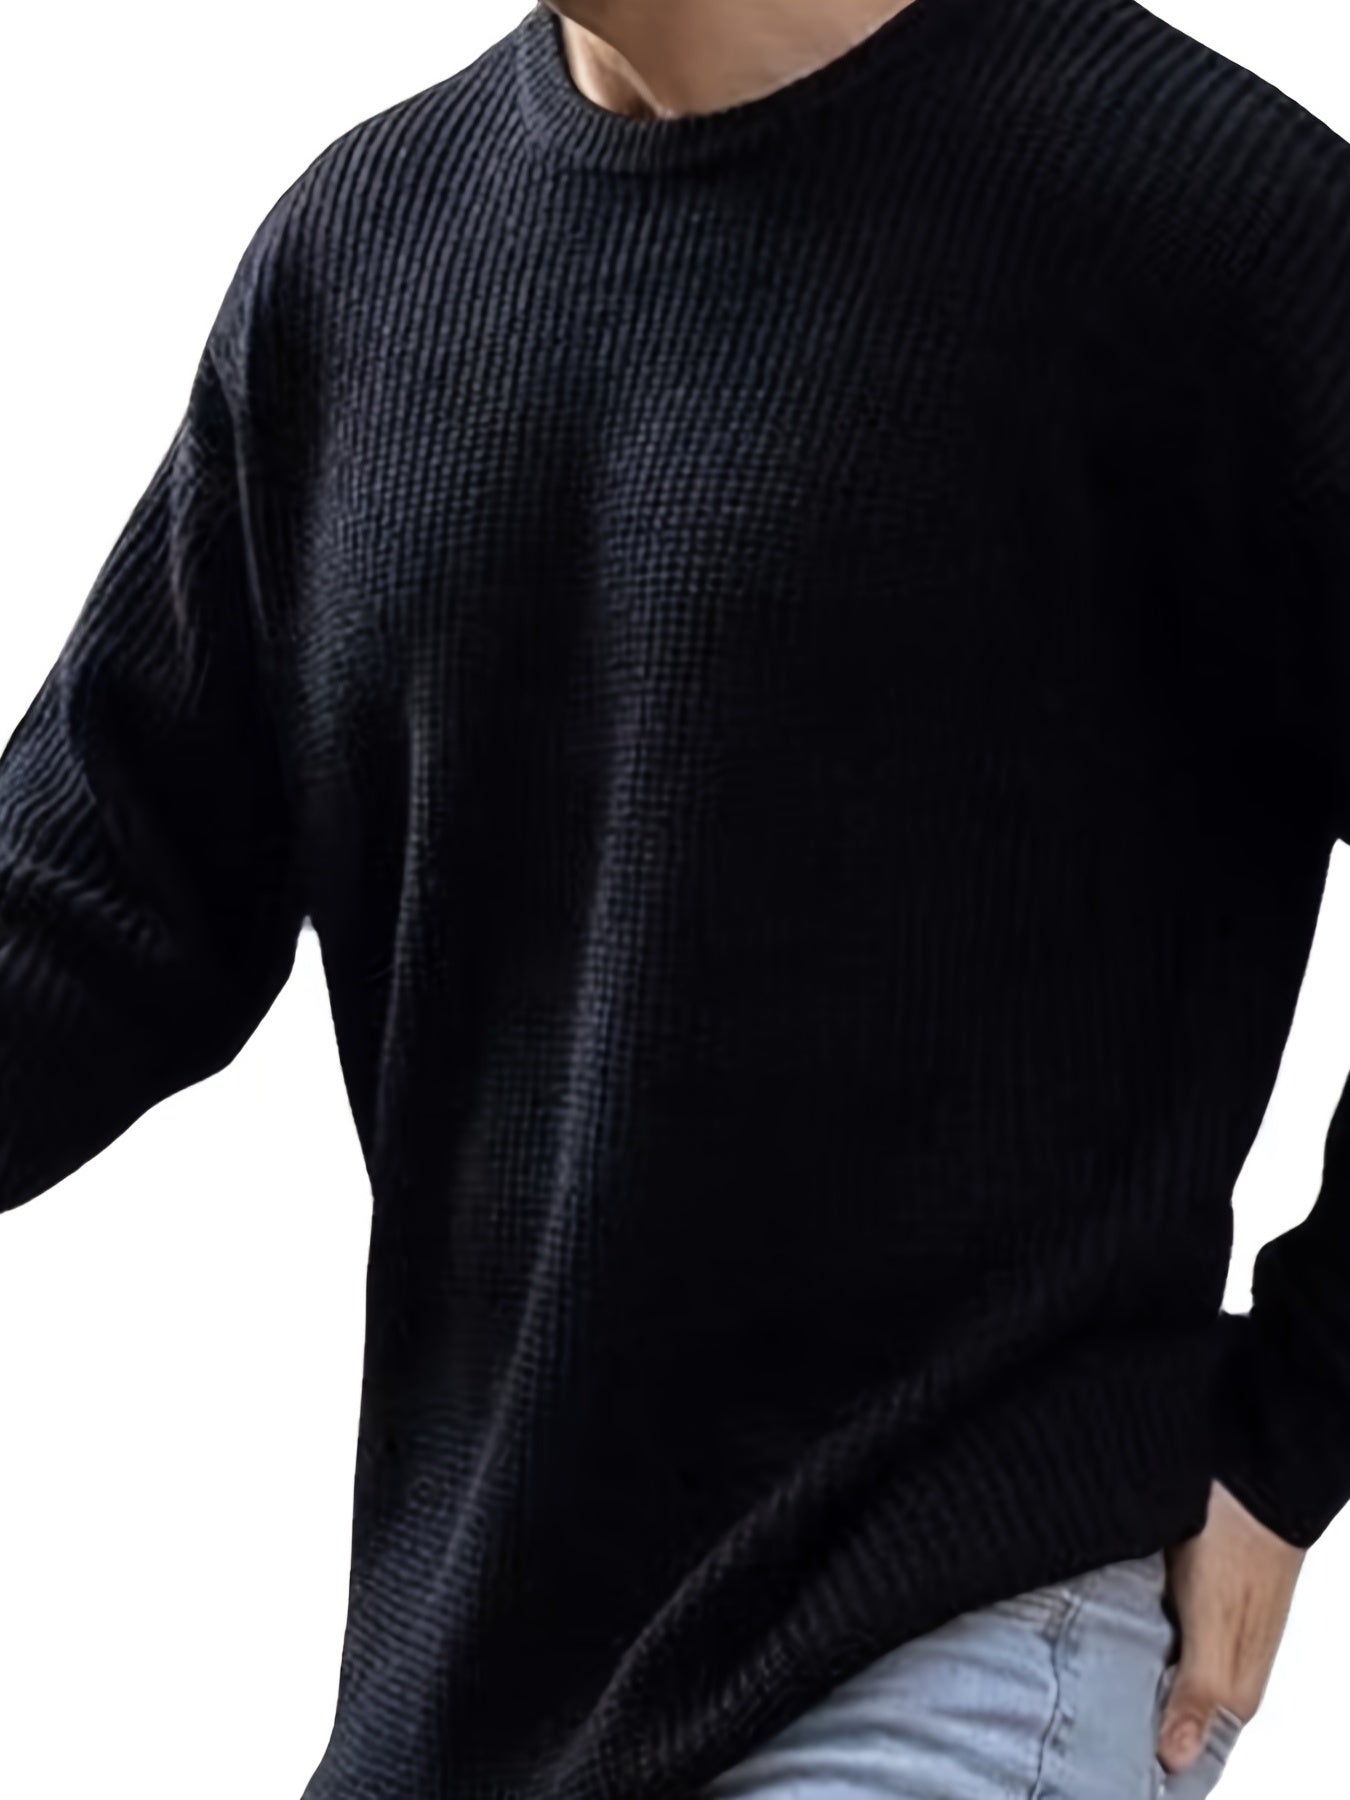 Foruwish - All Match Knitted Sweater, Men's Casual Warm Mid Stretch Round Neck Pullover Sweater For Fall Winter